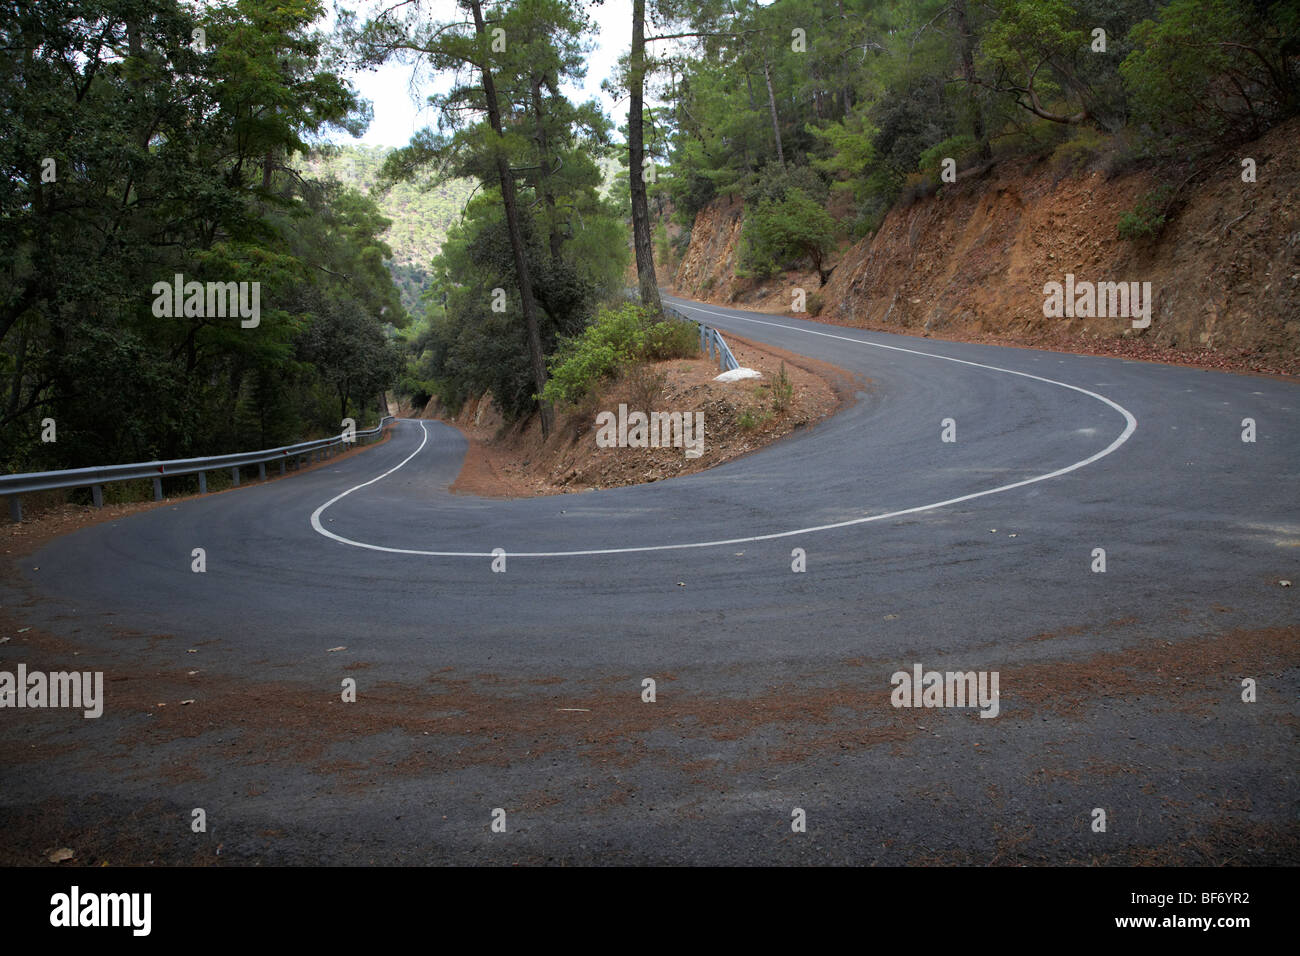 twisty hairpin bend in a mountain road in the troodos mountains forest republic of cyprus Stock Photo